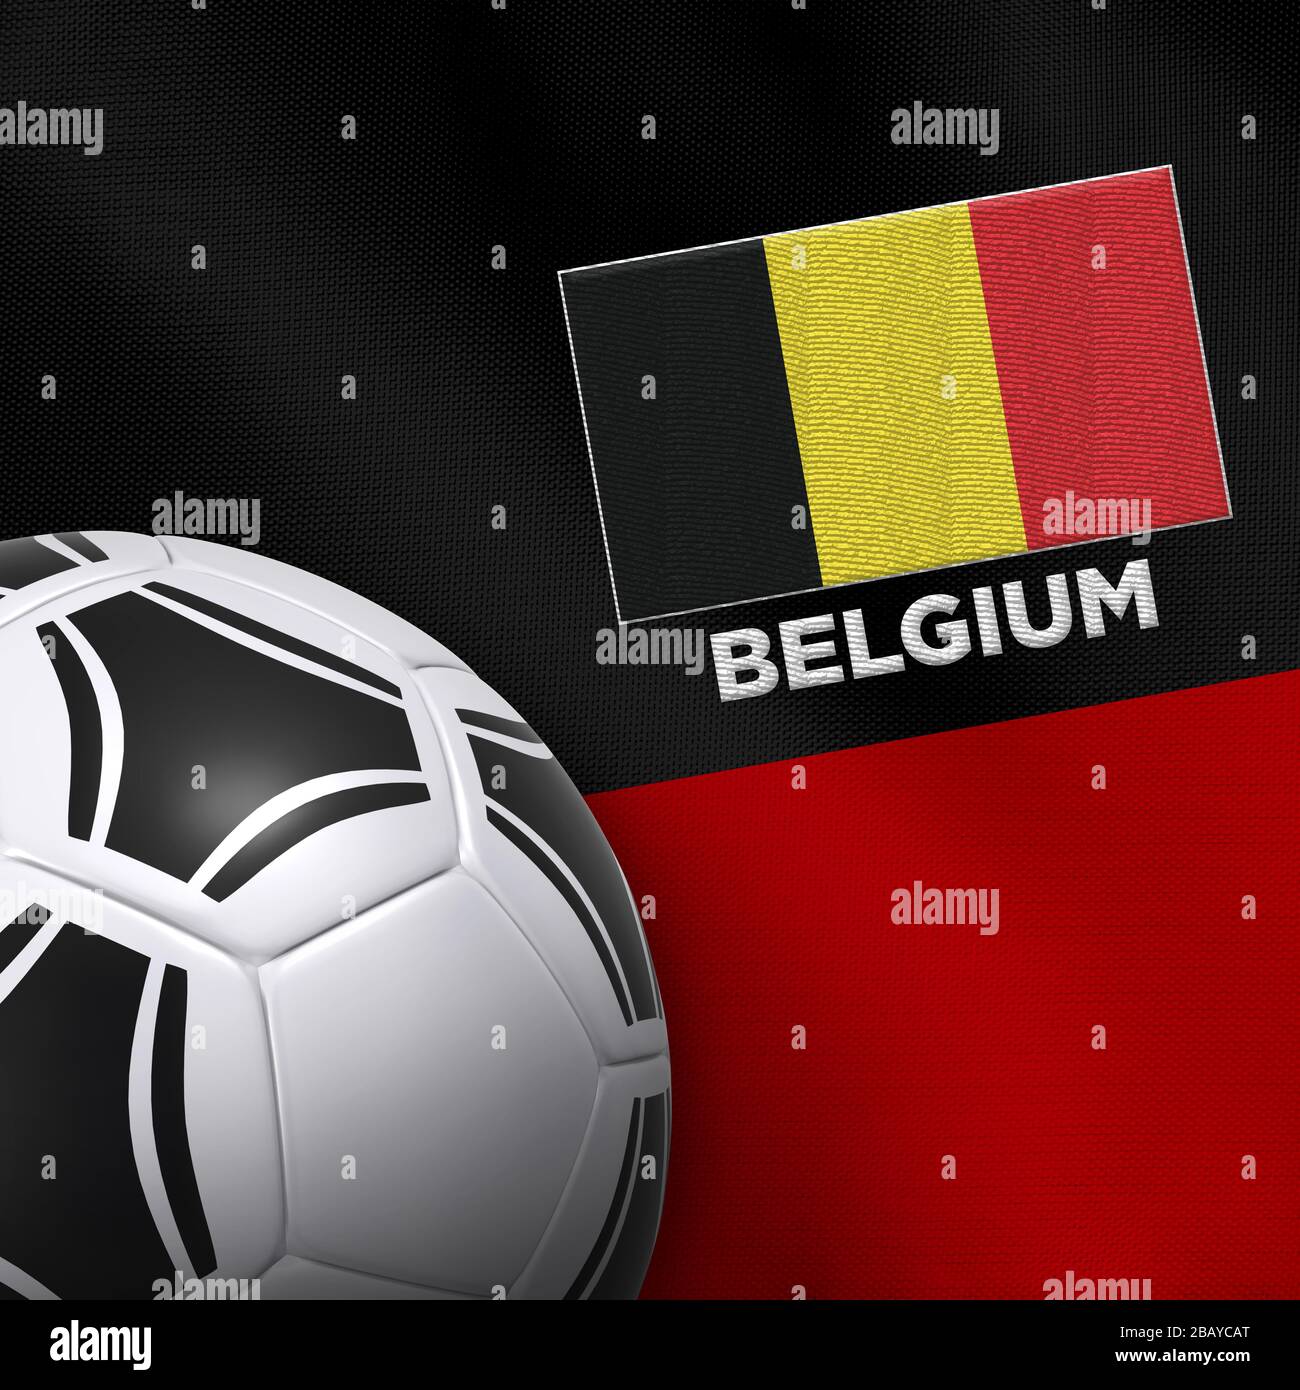 Football (soccer) ball and national team jersey of Belgium. Stock Photo